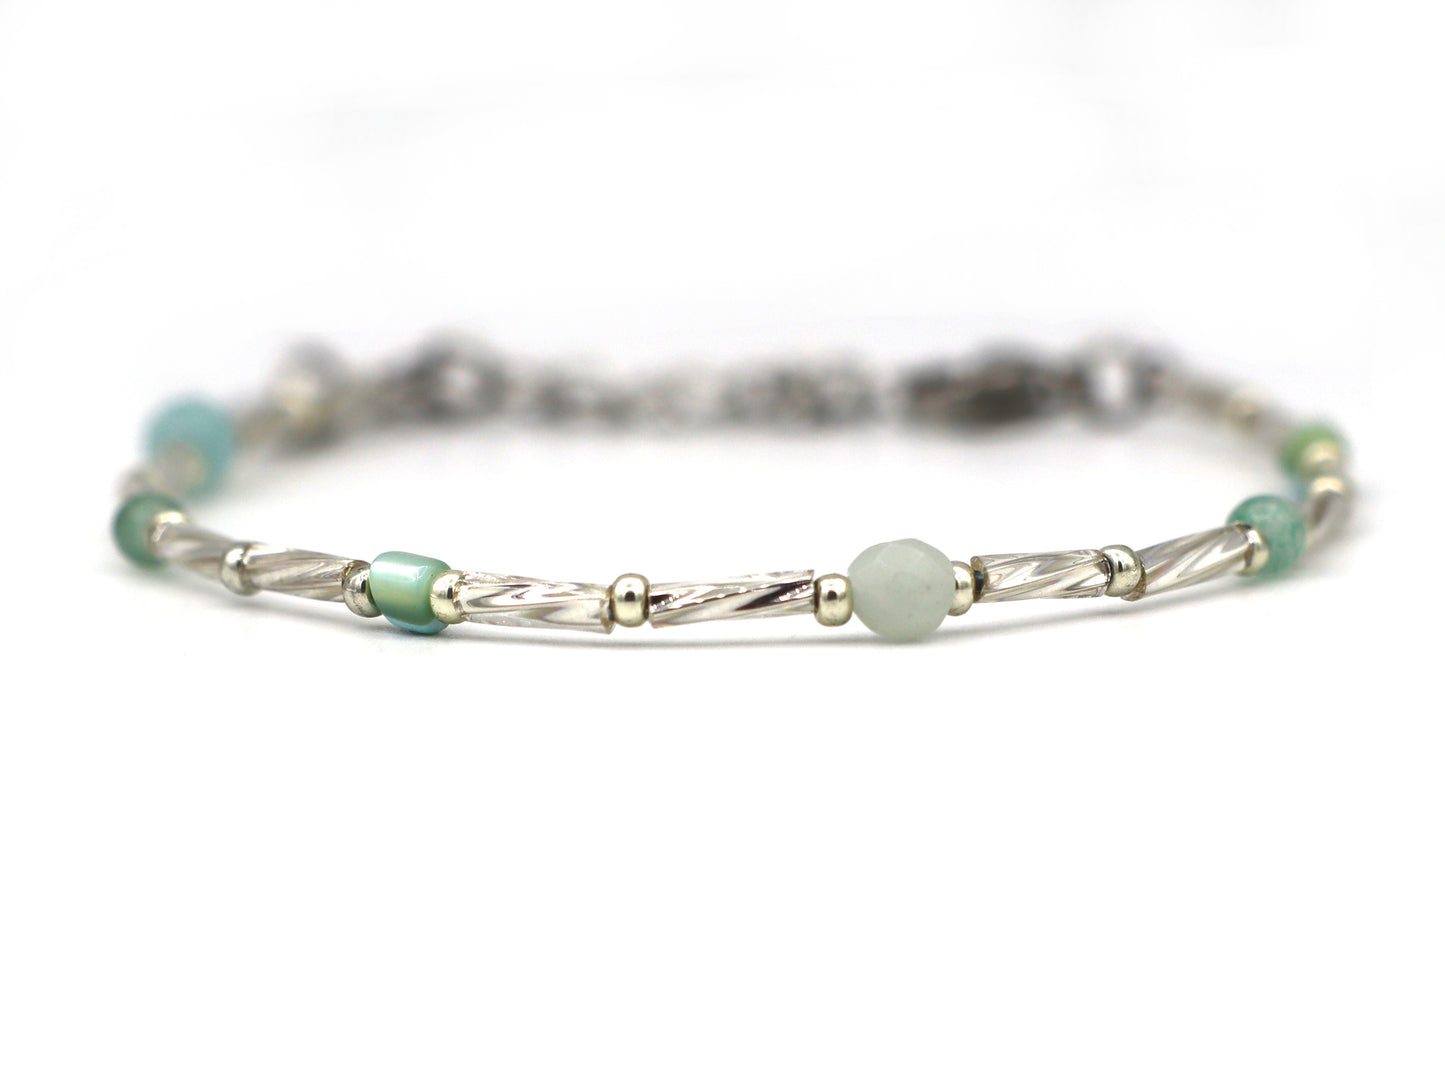 Bracelet Fira amazonite and aventurine, silver or gold stainless steel